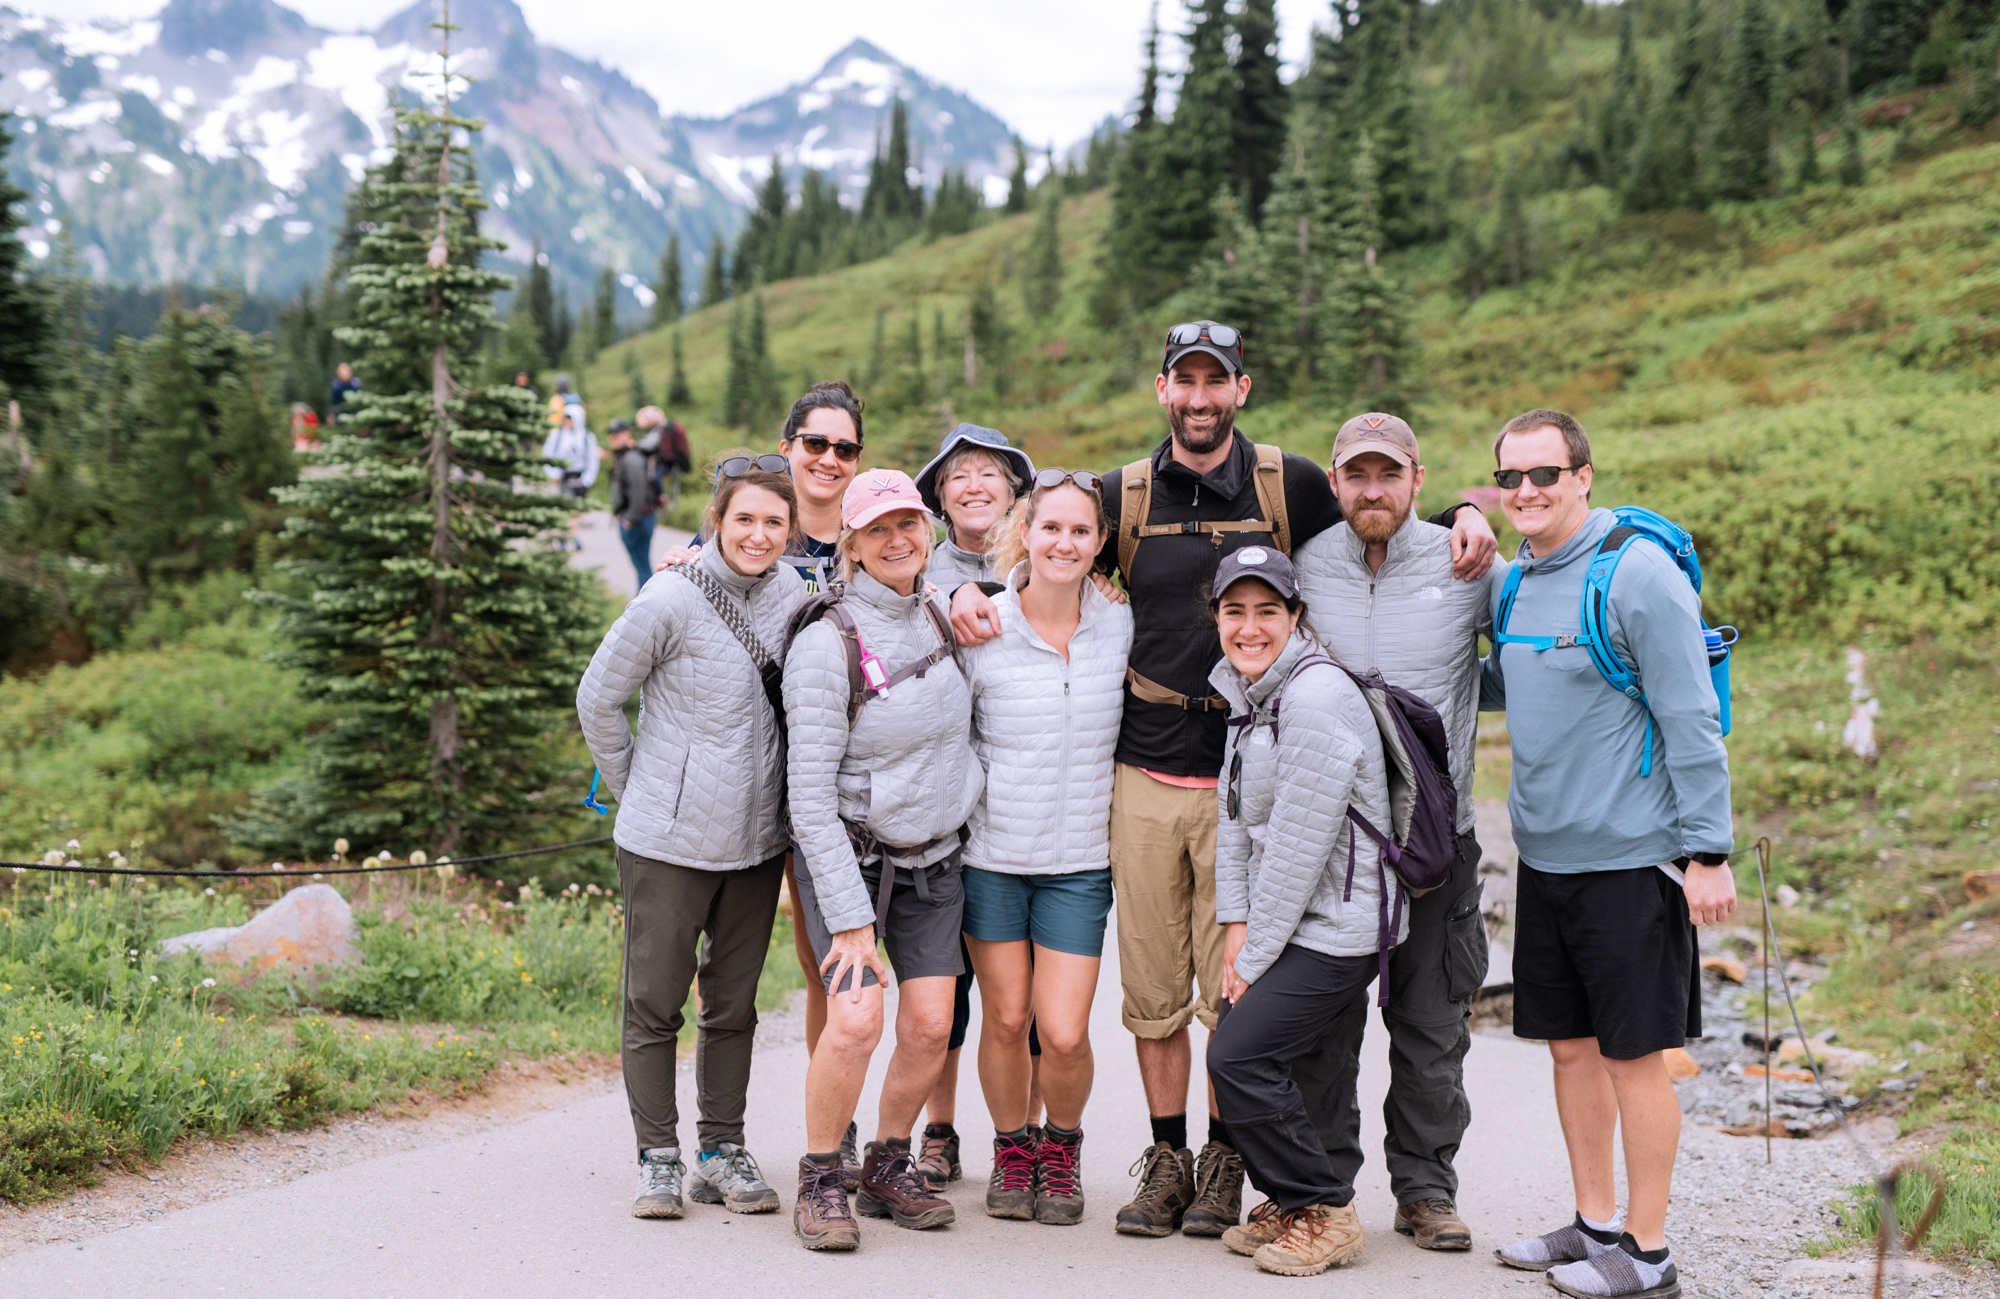 engaged couple with friends and family at the base of mt rainier wearing hiking clothes and shoes